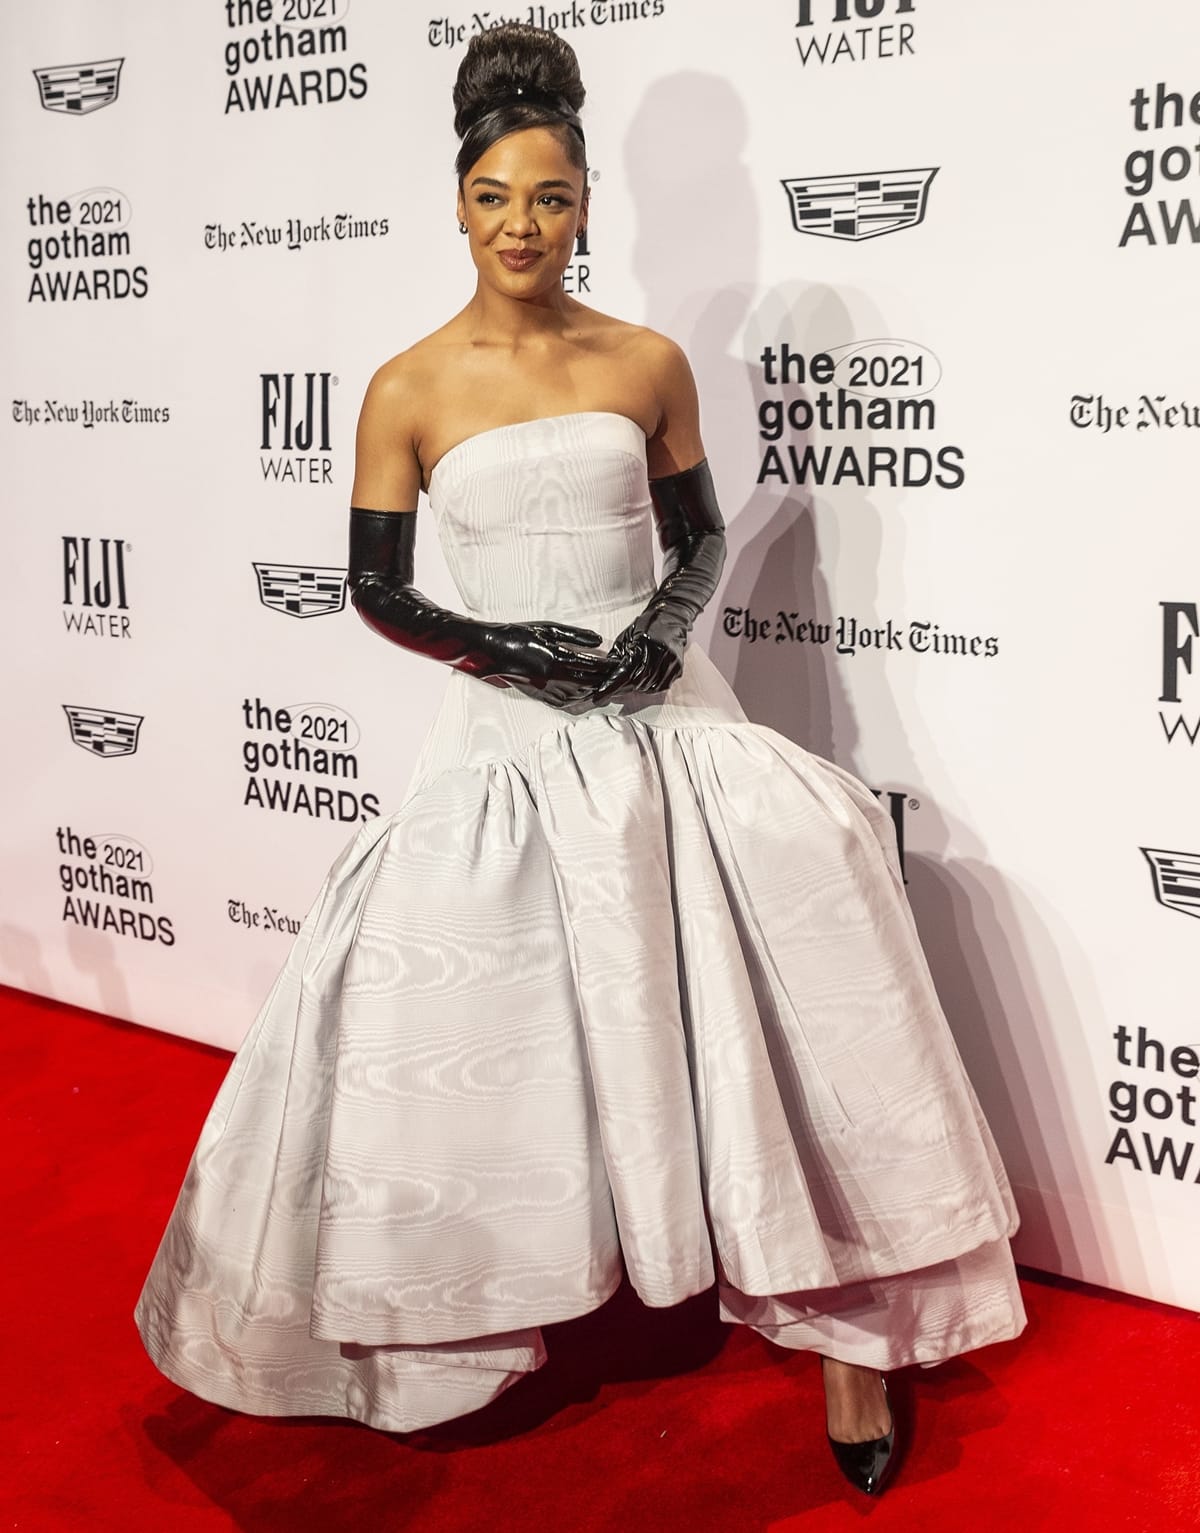 Tessa Thompson in a Bach Mai strapless dress with gloves at the 2021 Gotham Awards